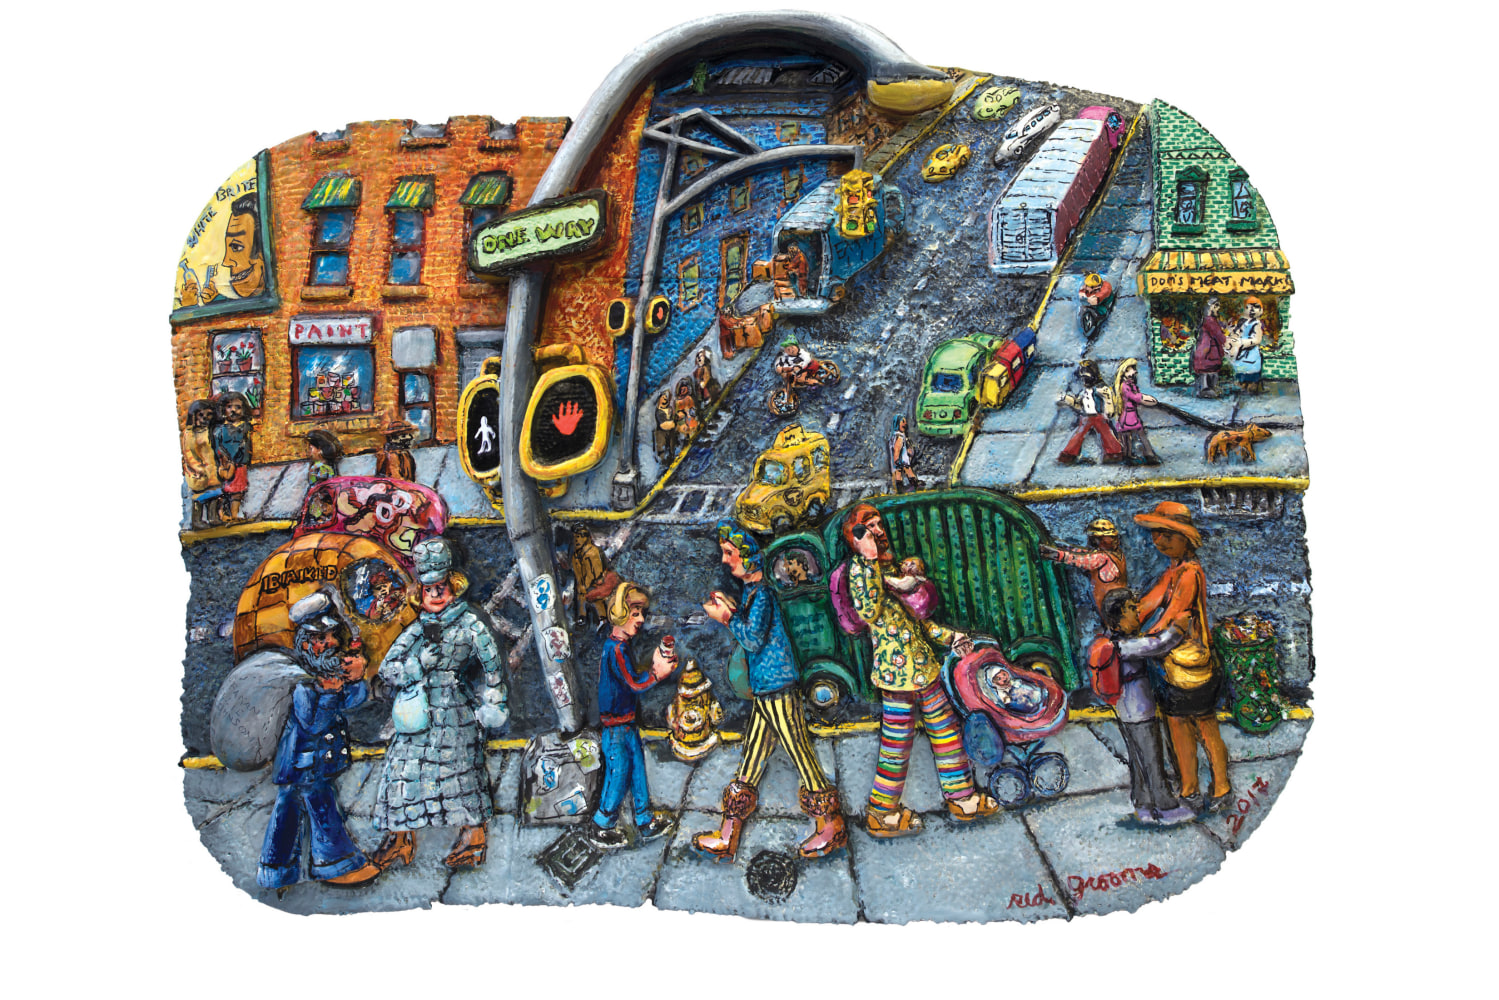 Acrylic, ink, mixed media and epoxy mounted on wood work by Red Groom of a bustling urban scene featuring figures in movement, a one way sign, and a paint storefronts